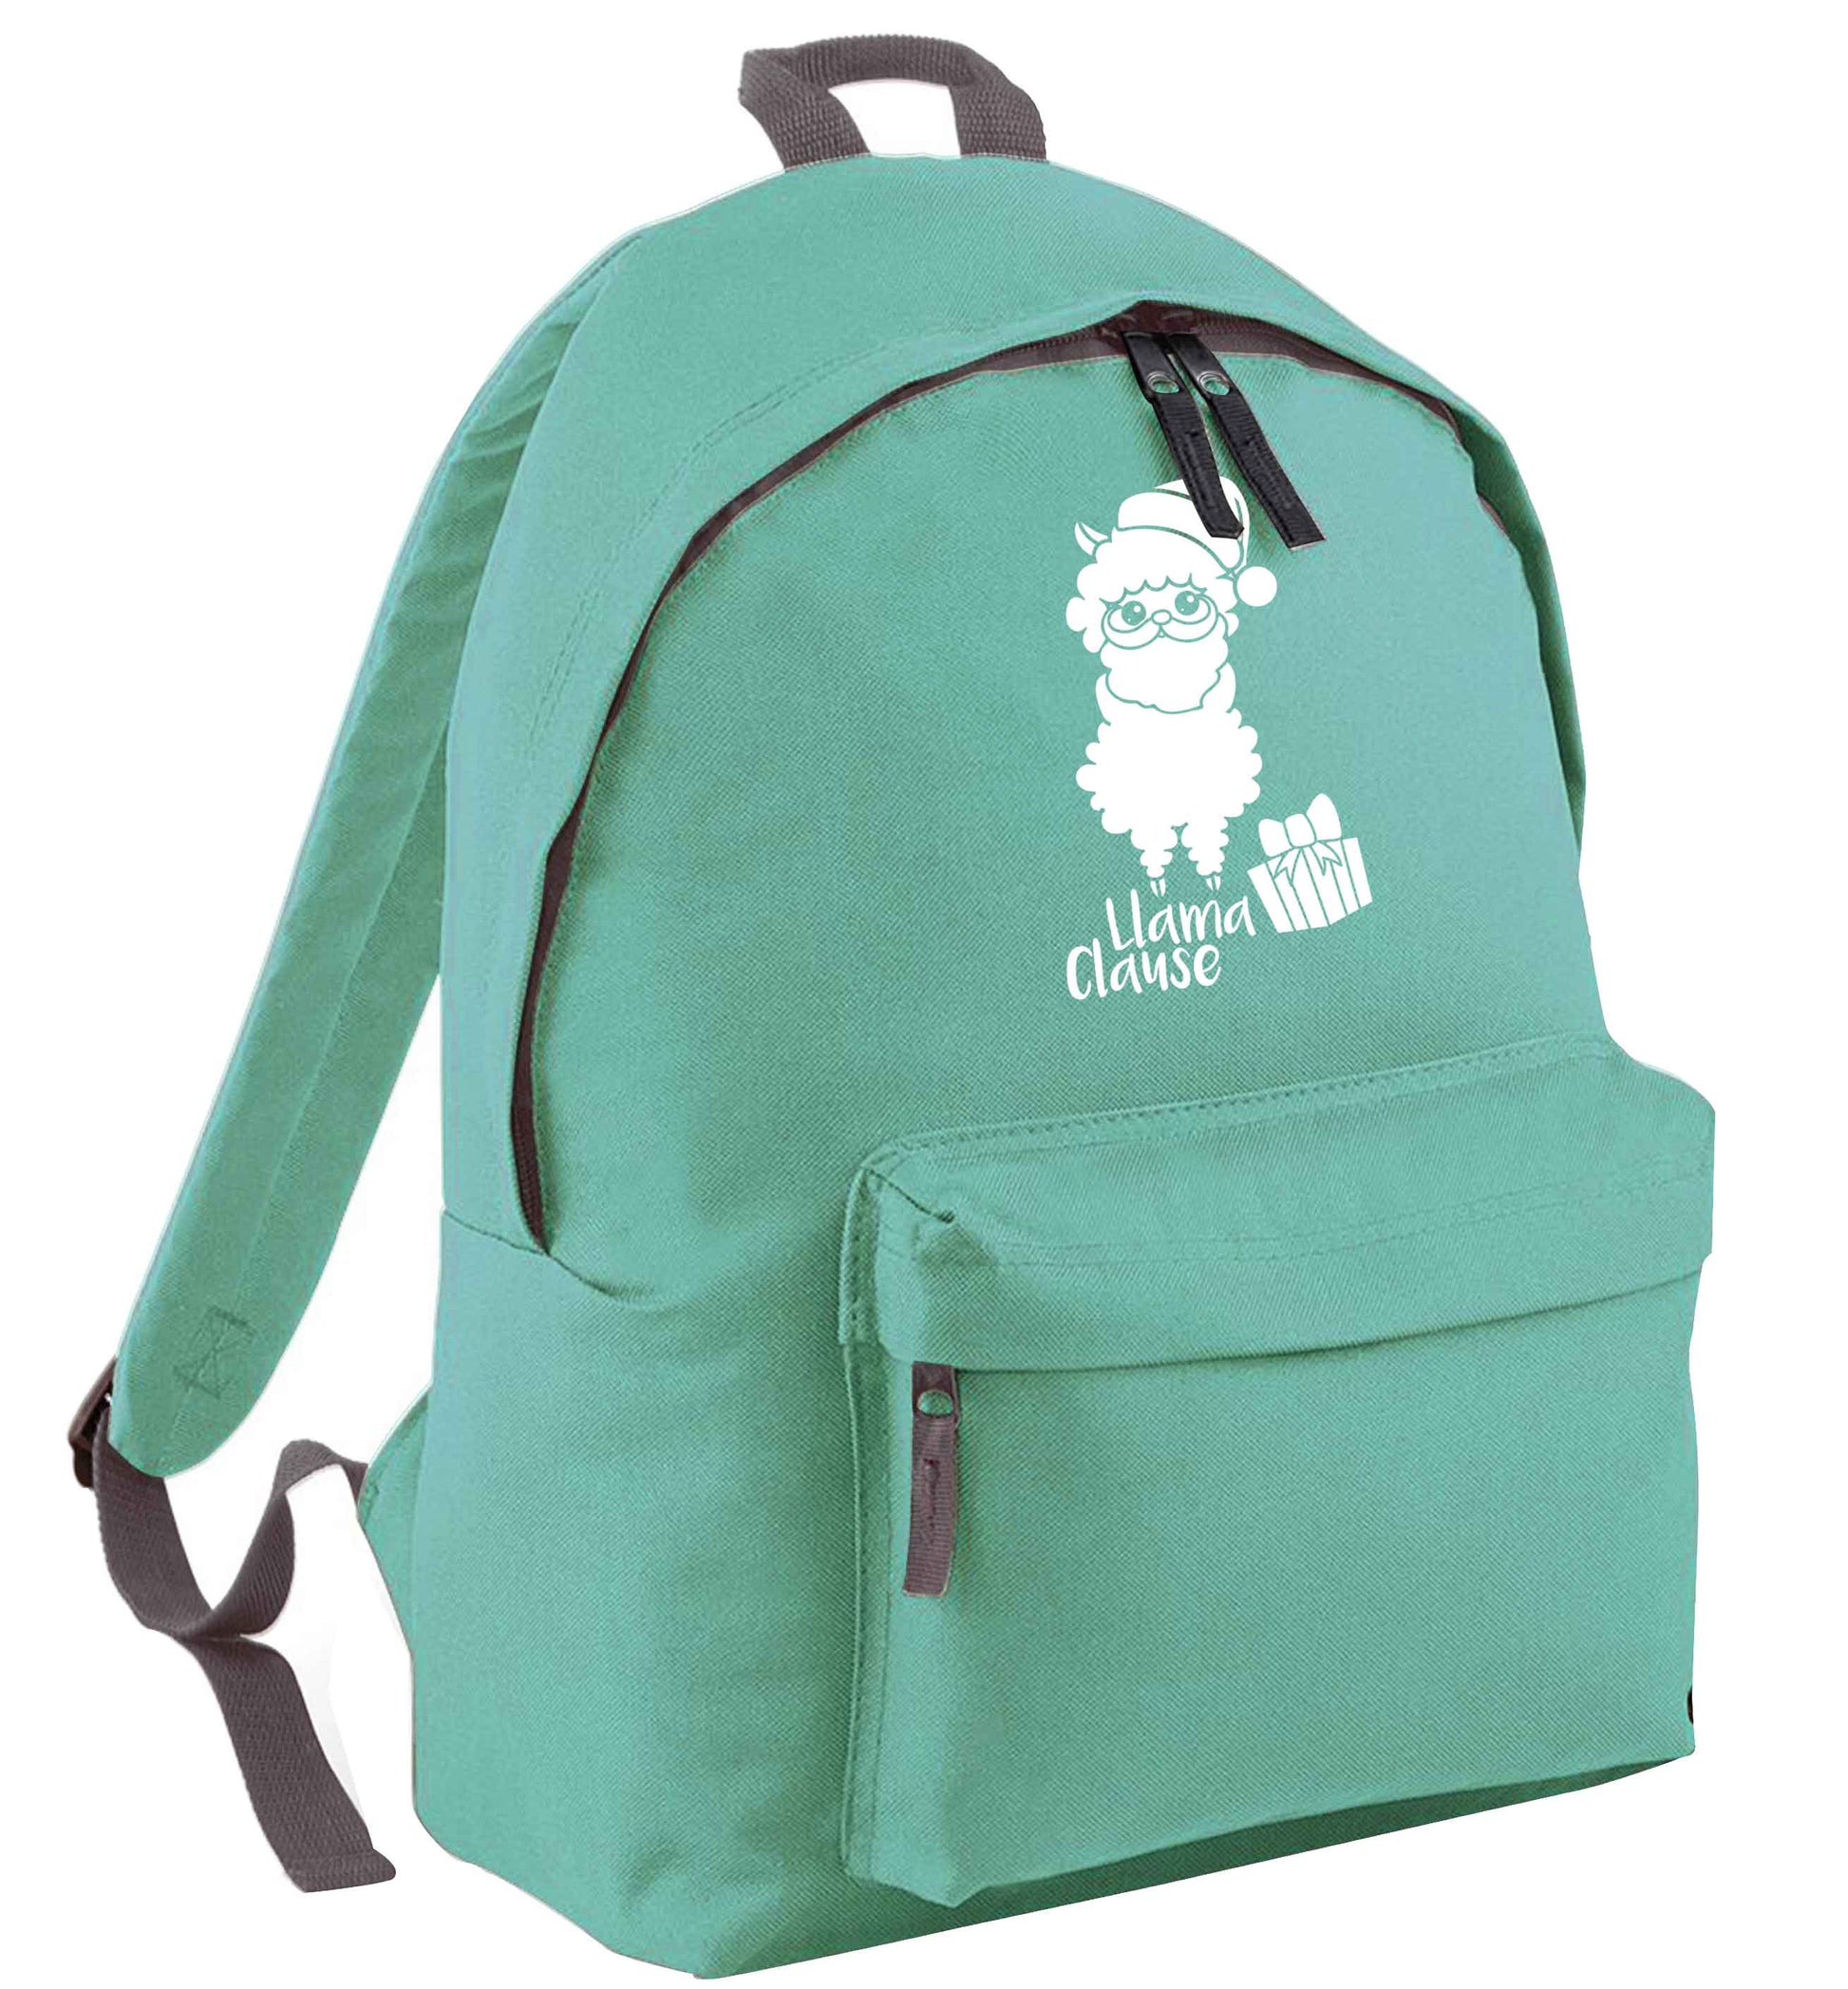 Llama Clause mint adults backpack